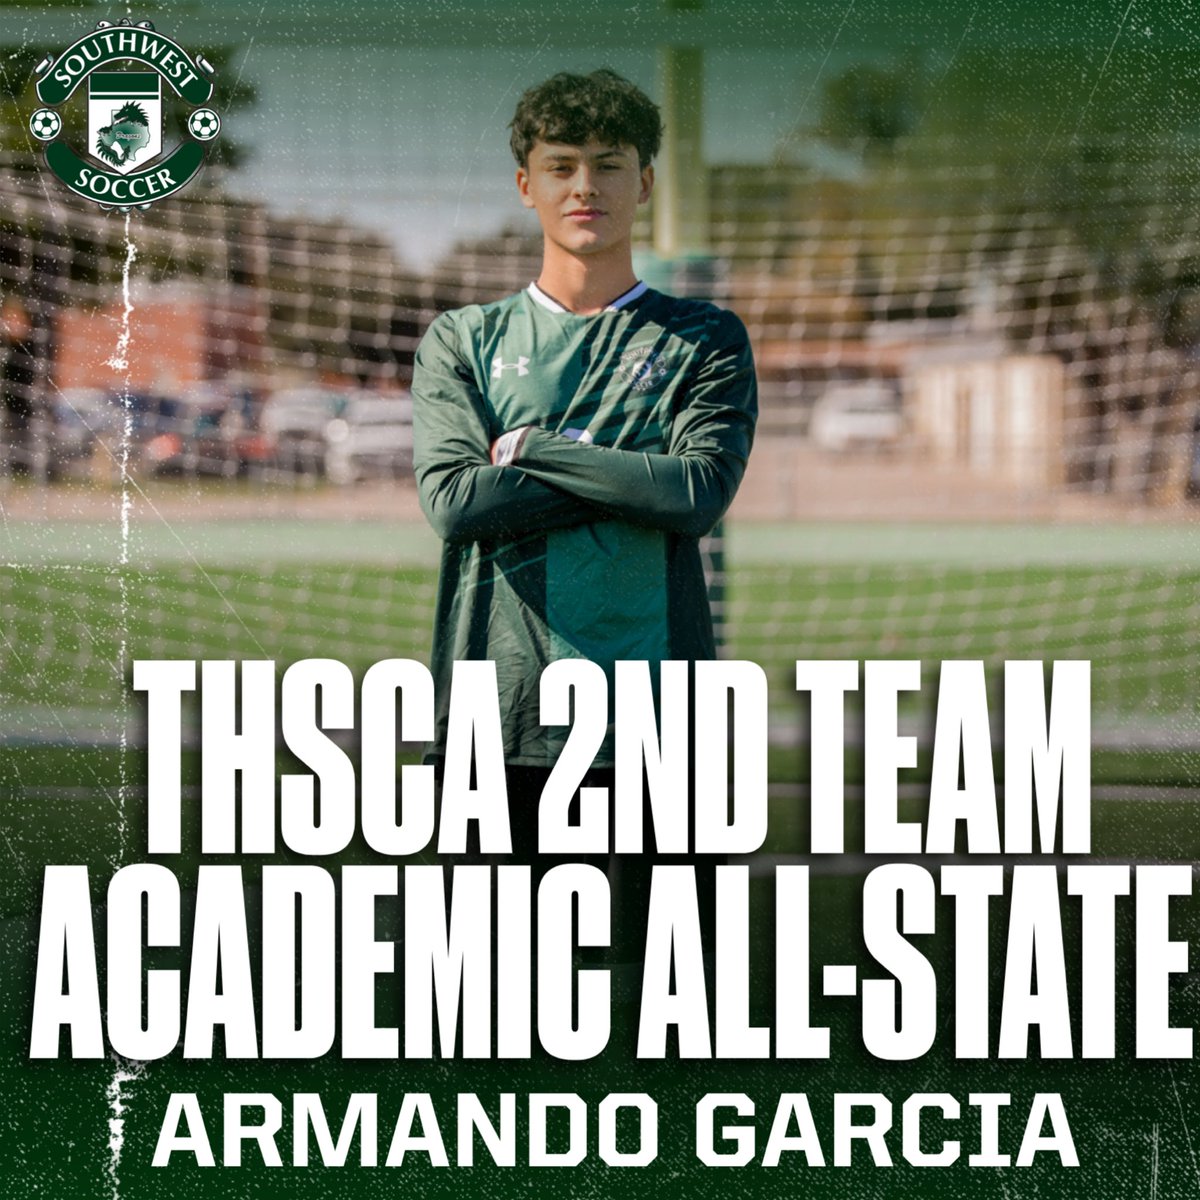 Congrats to Senior Armando for getting it done in the classroom!!